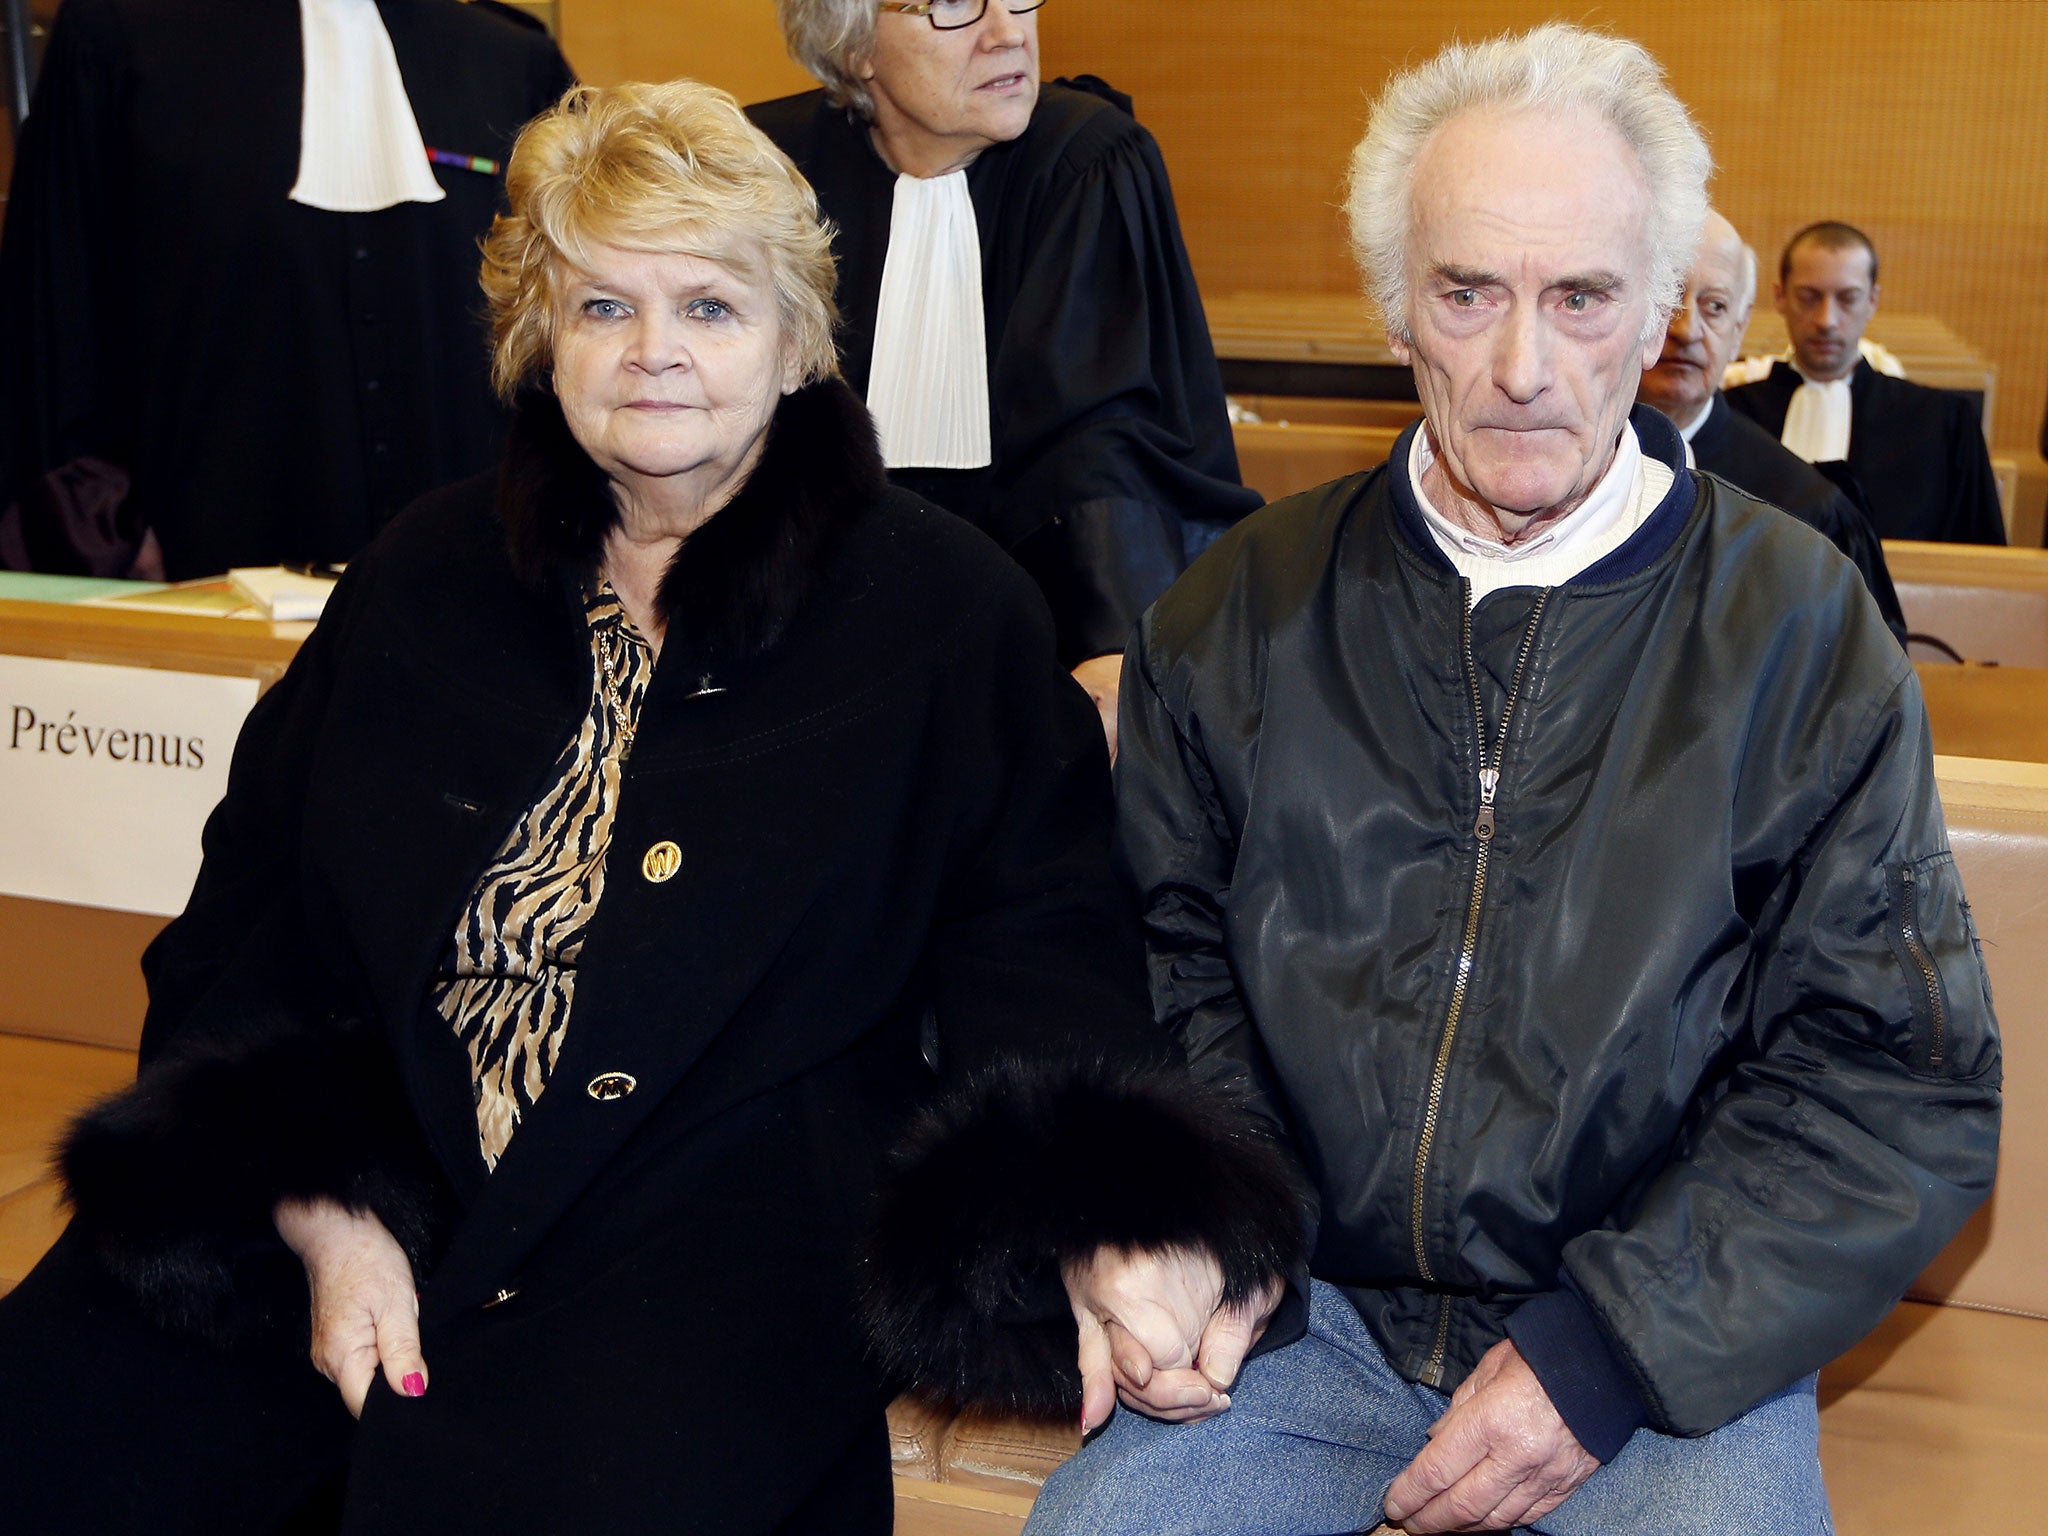 Pierre Le Guennec,who was accused of receiving stolen goods after being found in possession of paintings by late Spanish artist Pablo Picasso, sits with his wife Danielle in court